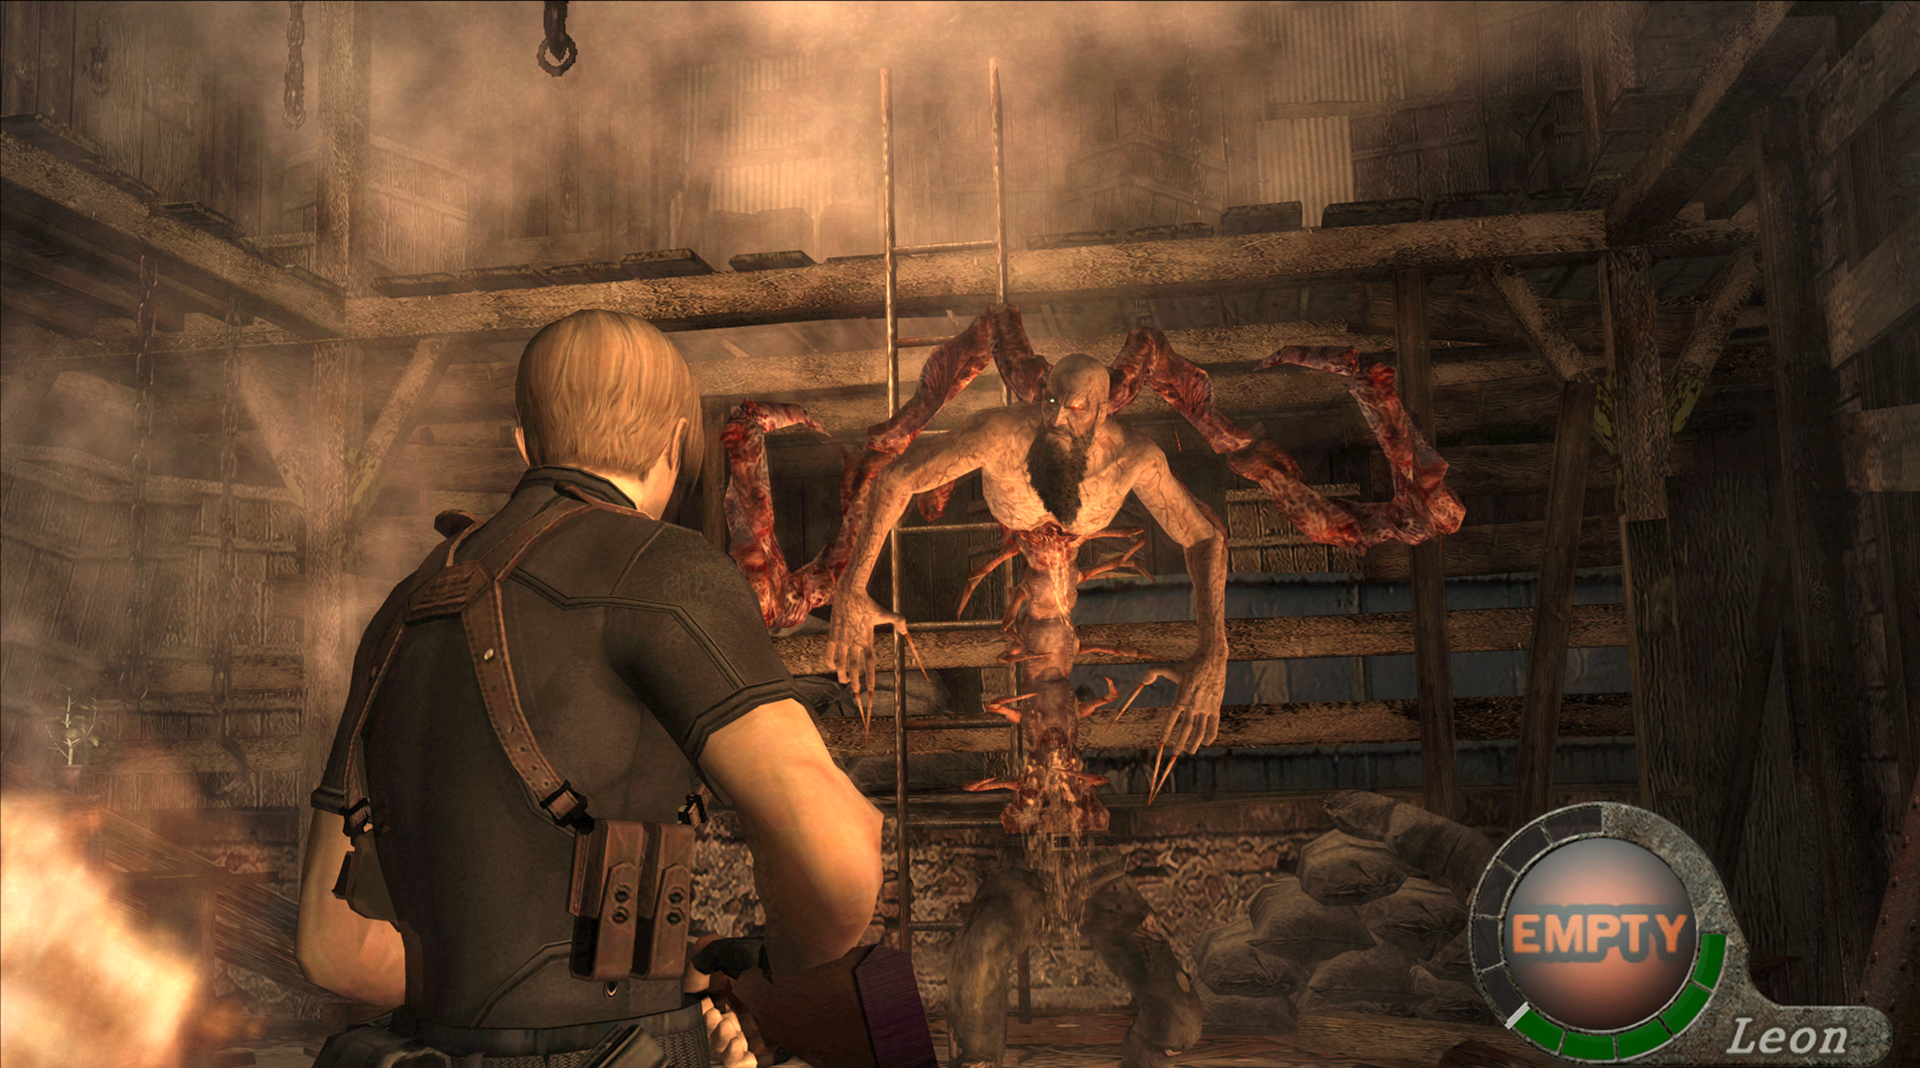 Download Resident Evil 4 Ultimate Community Patch 2.0 free